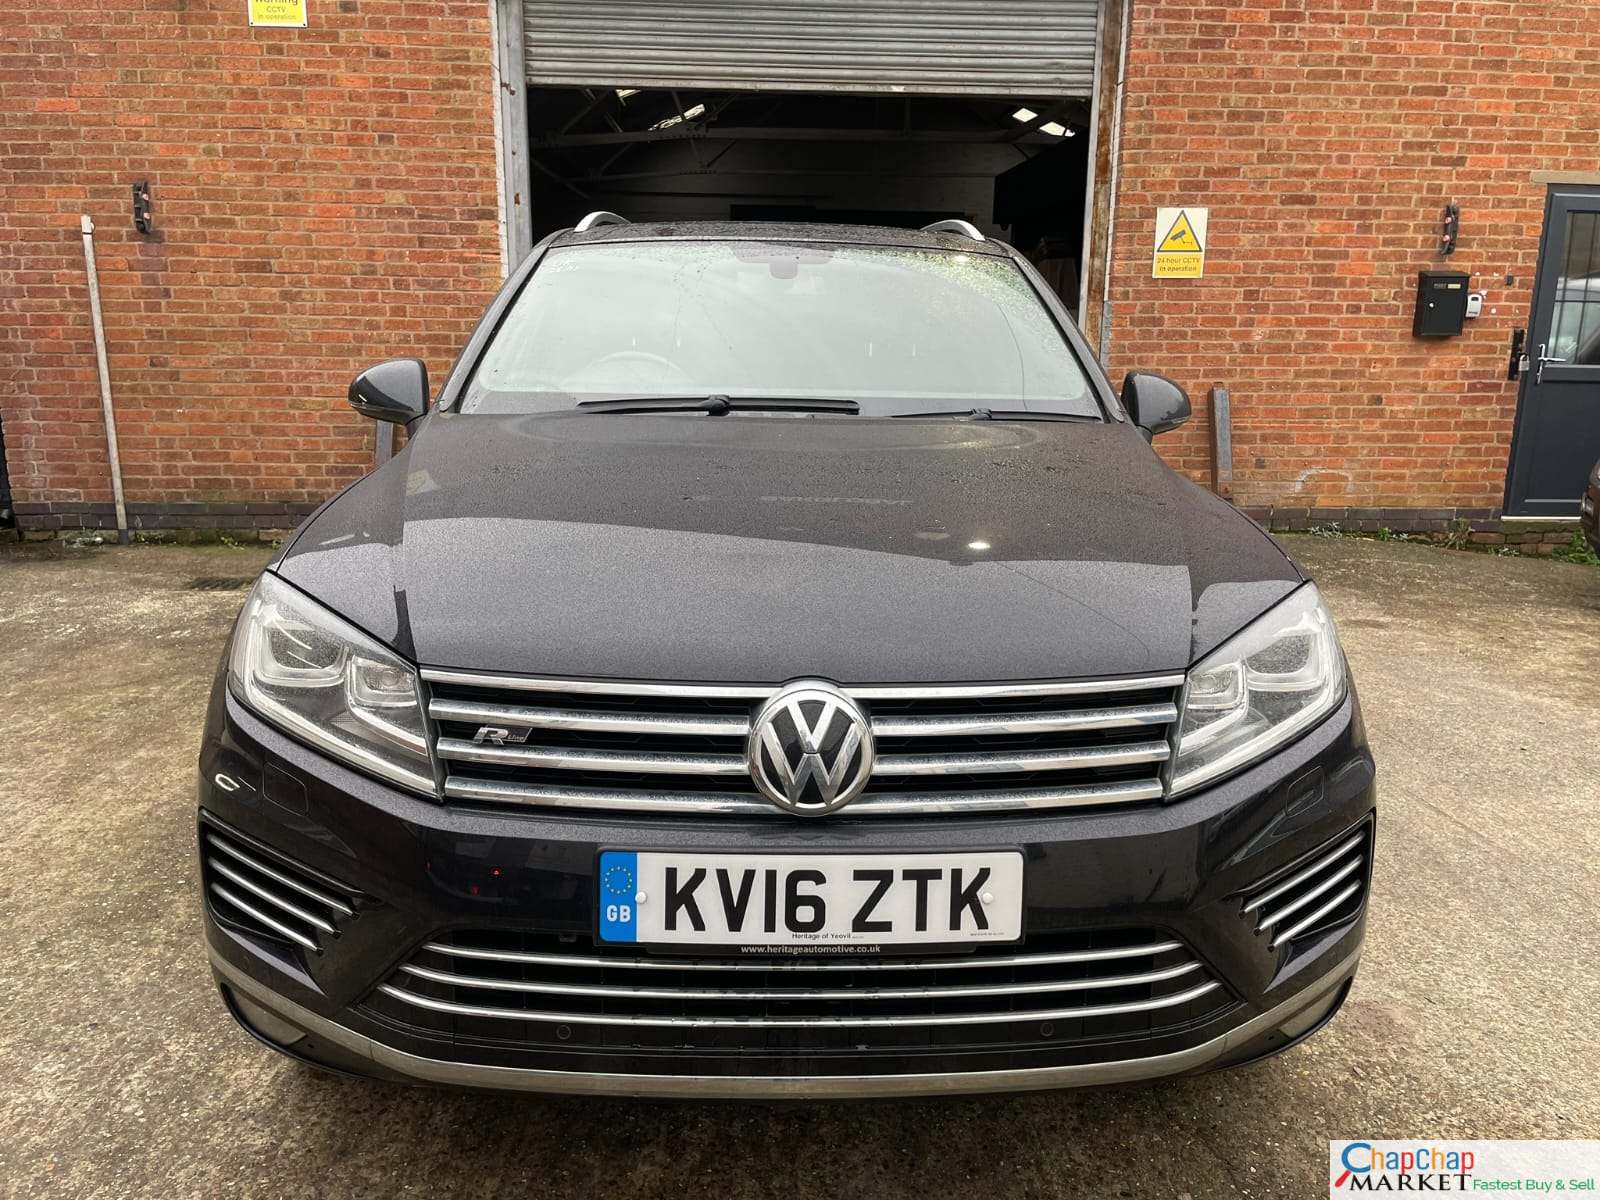 Volkswagen Touareg R LINE PANORAMIC SUNROOF JUST ARRIVED Trade in Ok EXCLUSIVE